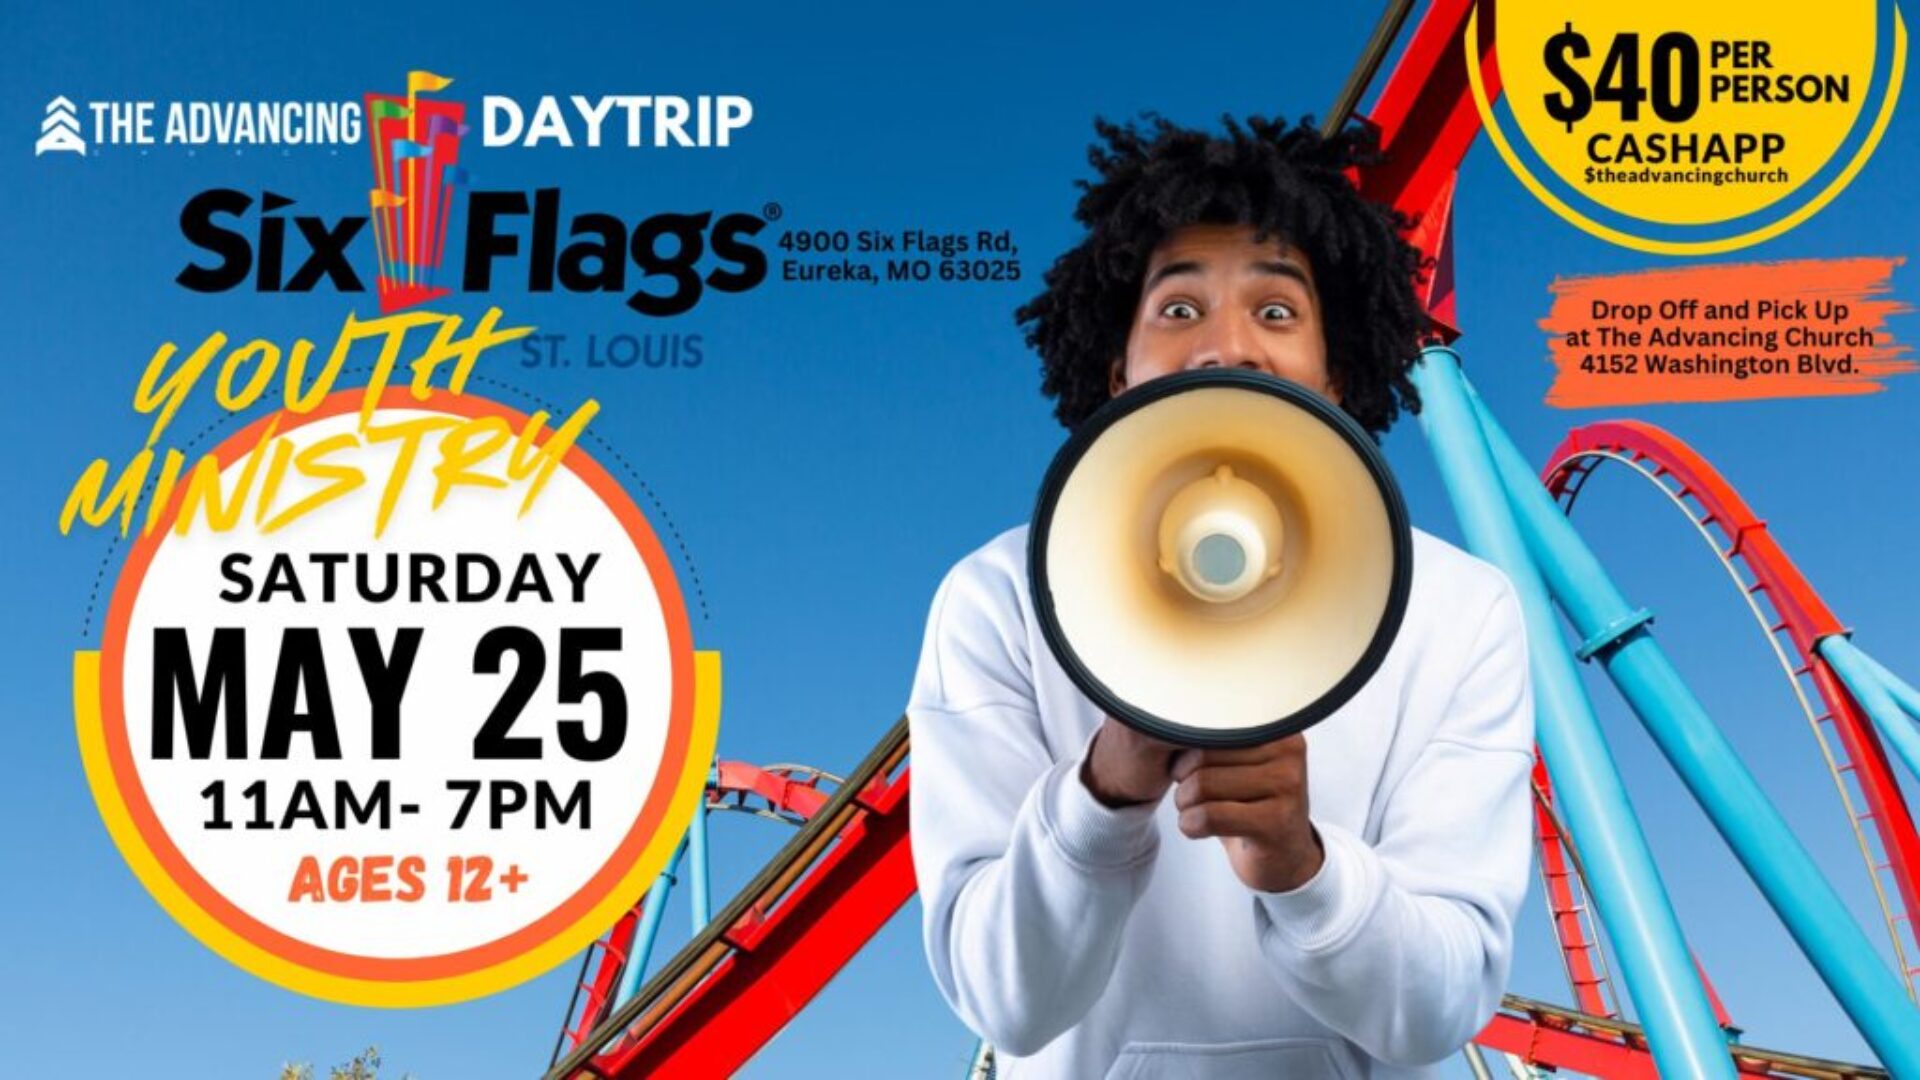 Six Flags Event